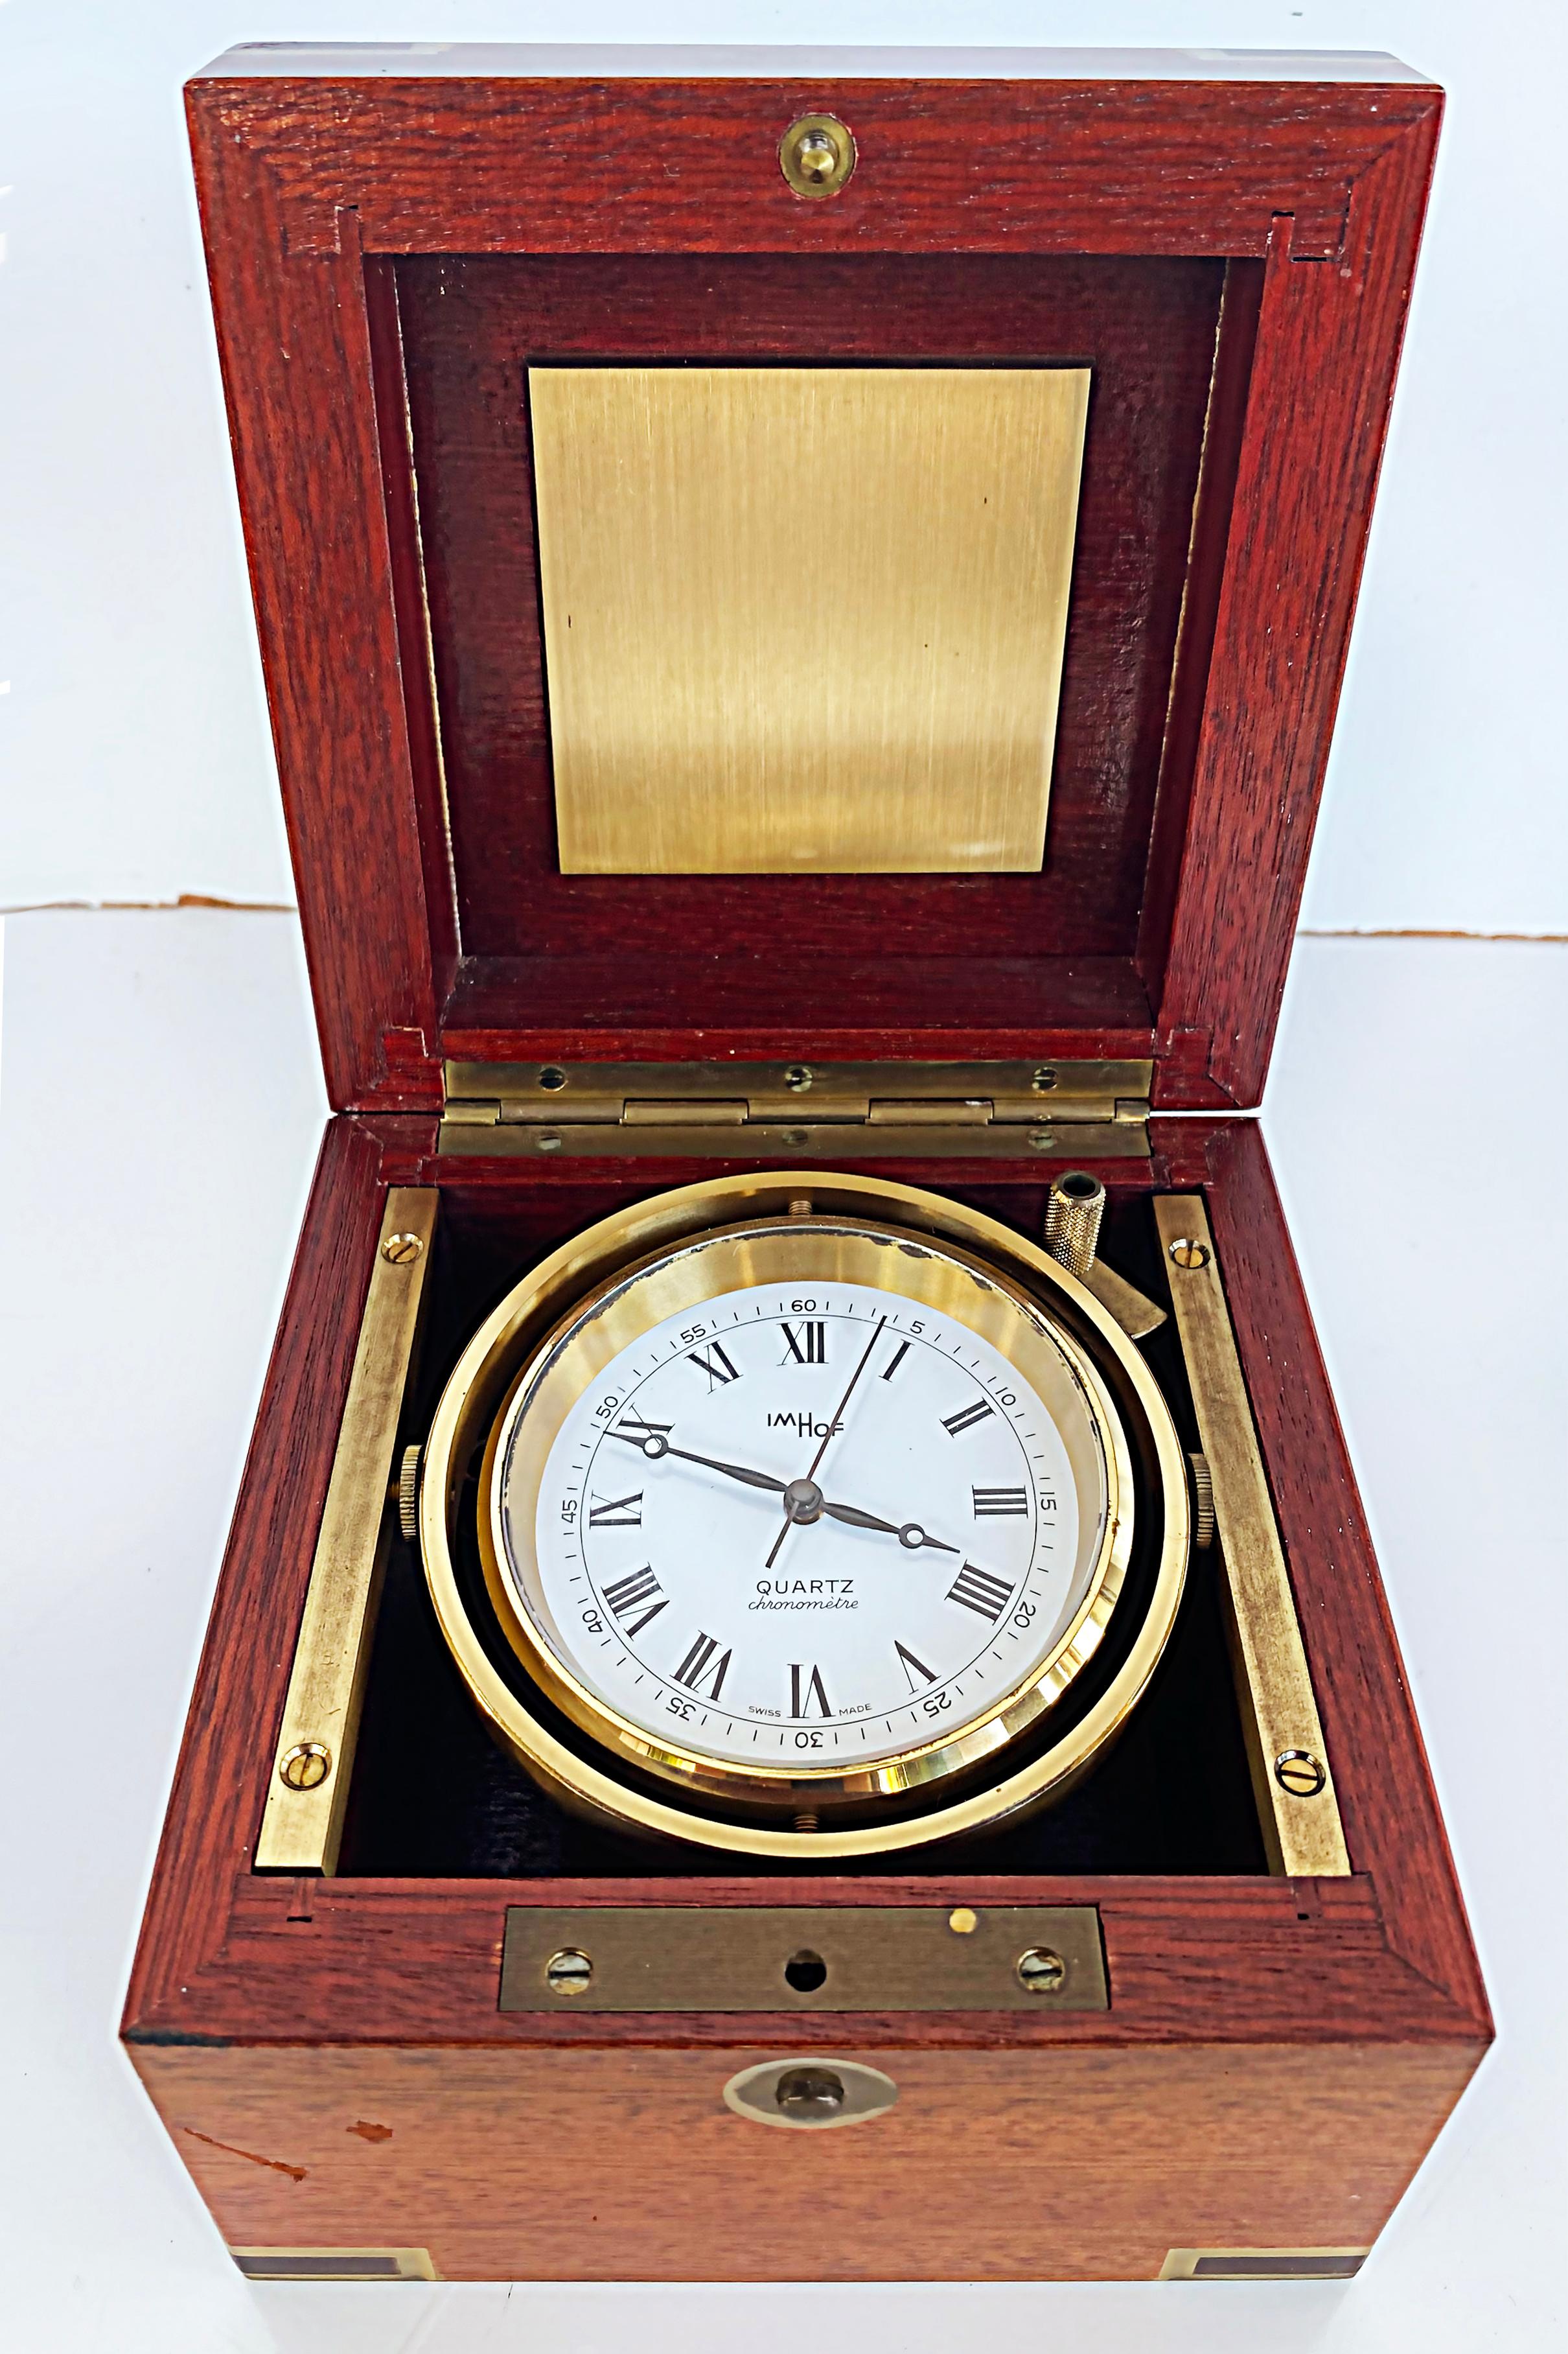 Arthur Imhof Swiss nautical chronometer in brass, wood case, 20th century

Offered for sale is an Arthur Imhof Swiss nautical chronometer encased in a brass and wood box and retaining original tag with serial #1842425. Arthur IMHOF SA was founded